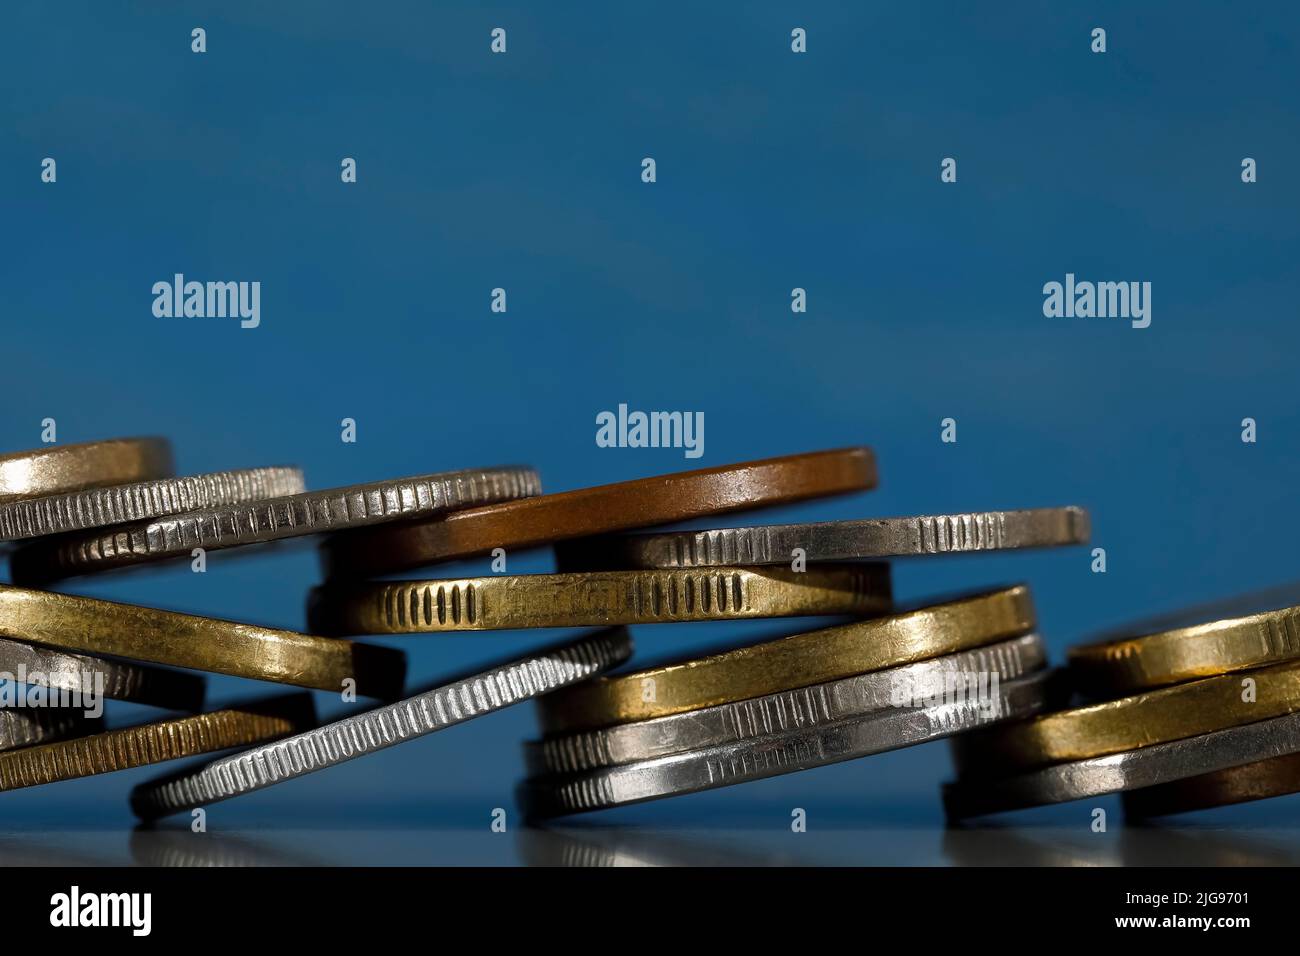 Different coins are arranged and are shown against blue background. Stock Photo